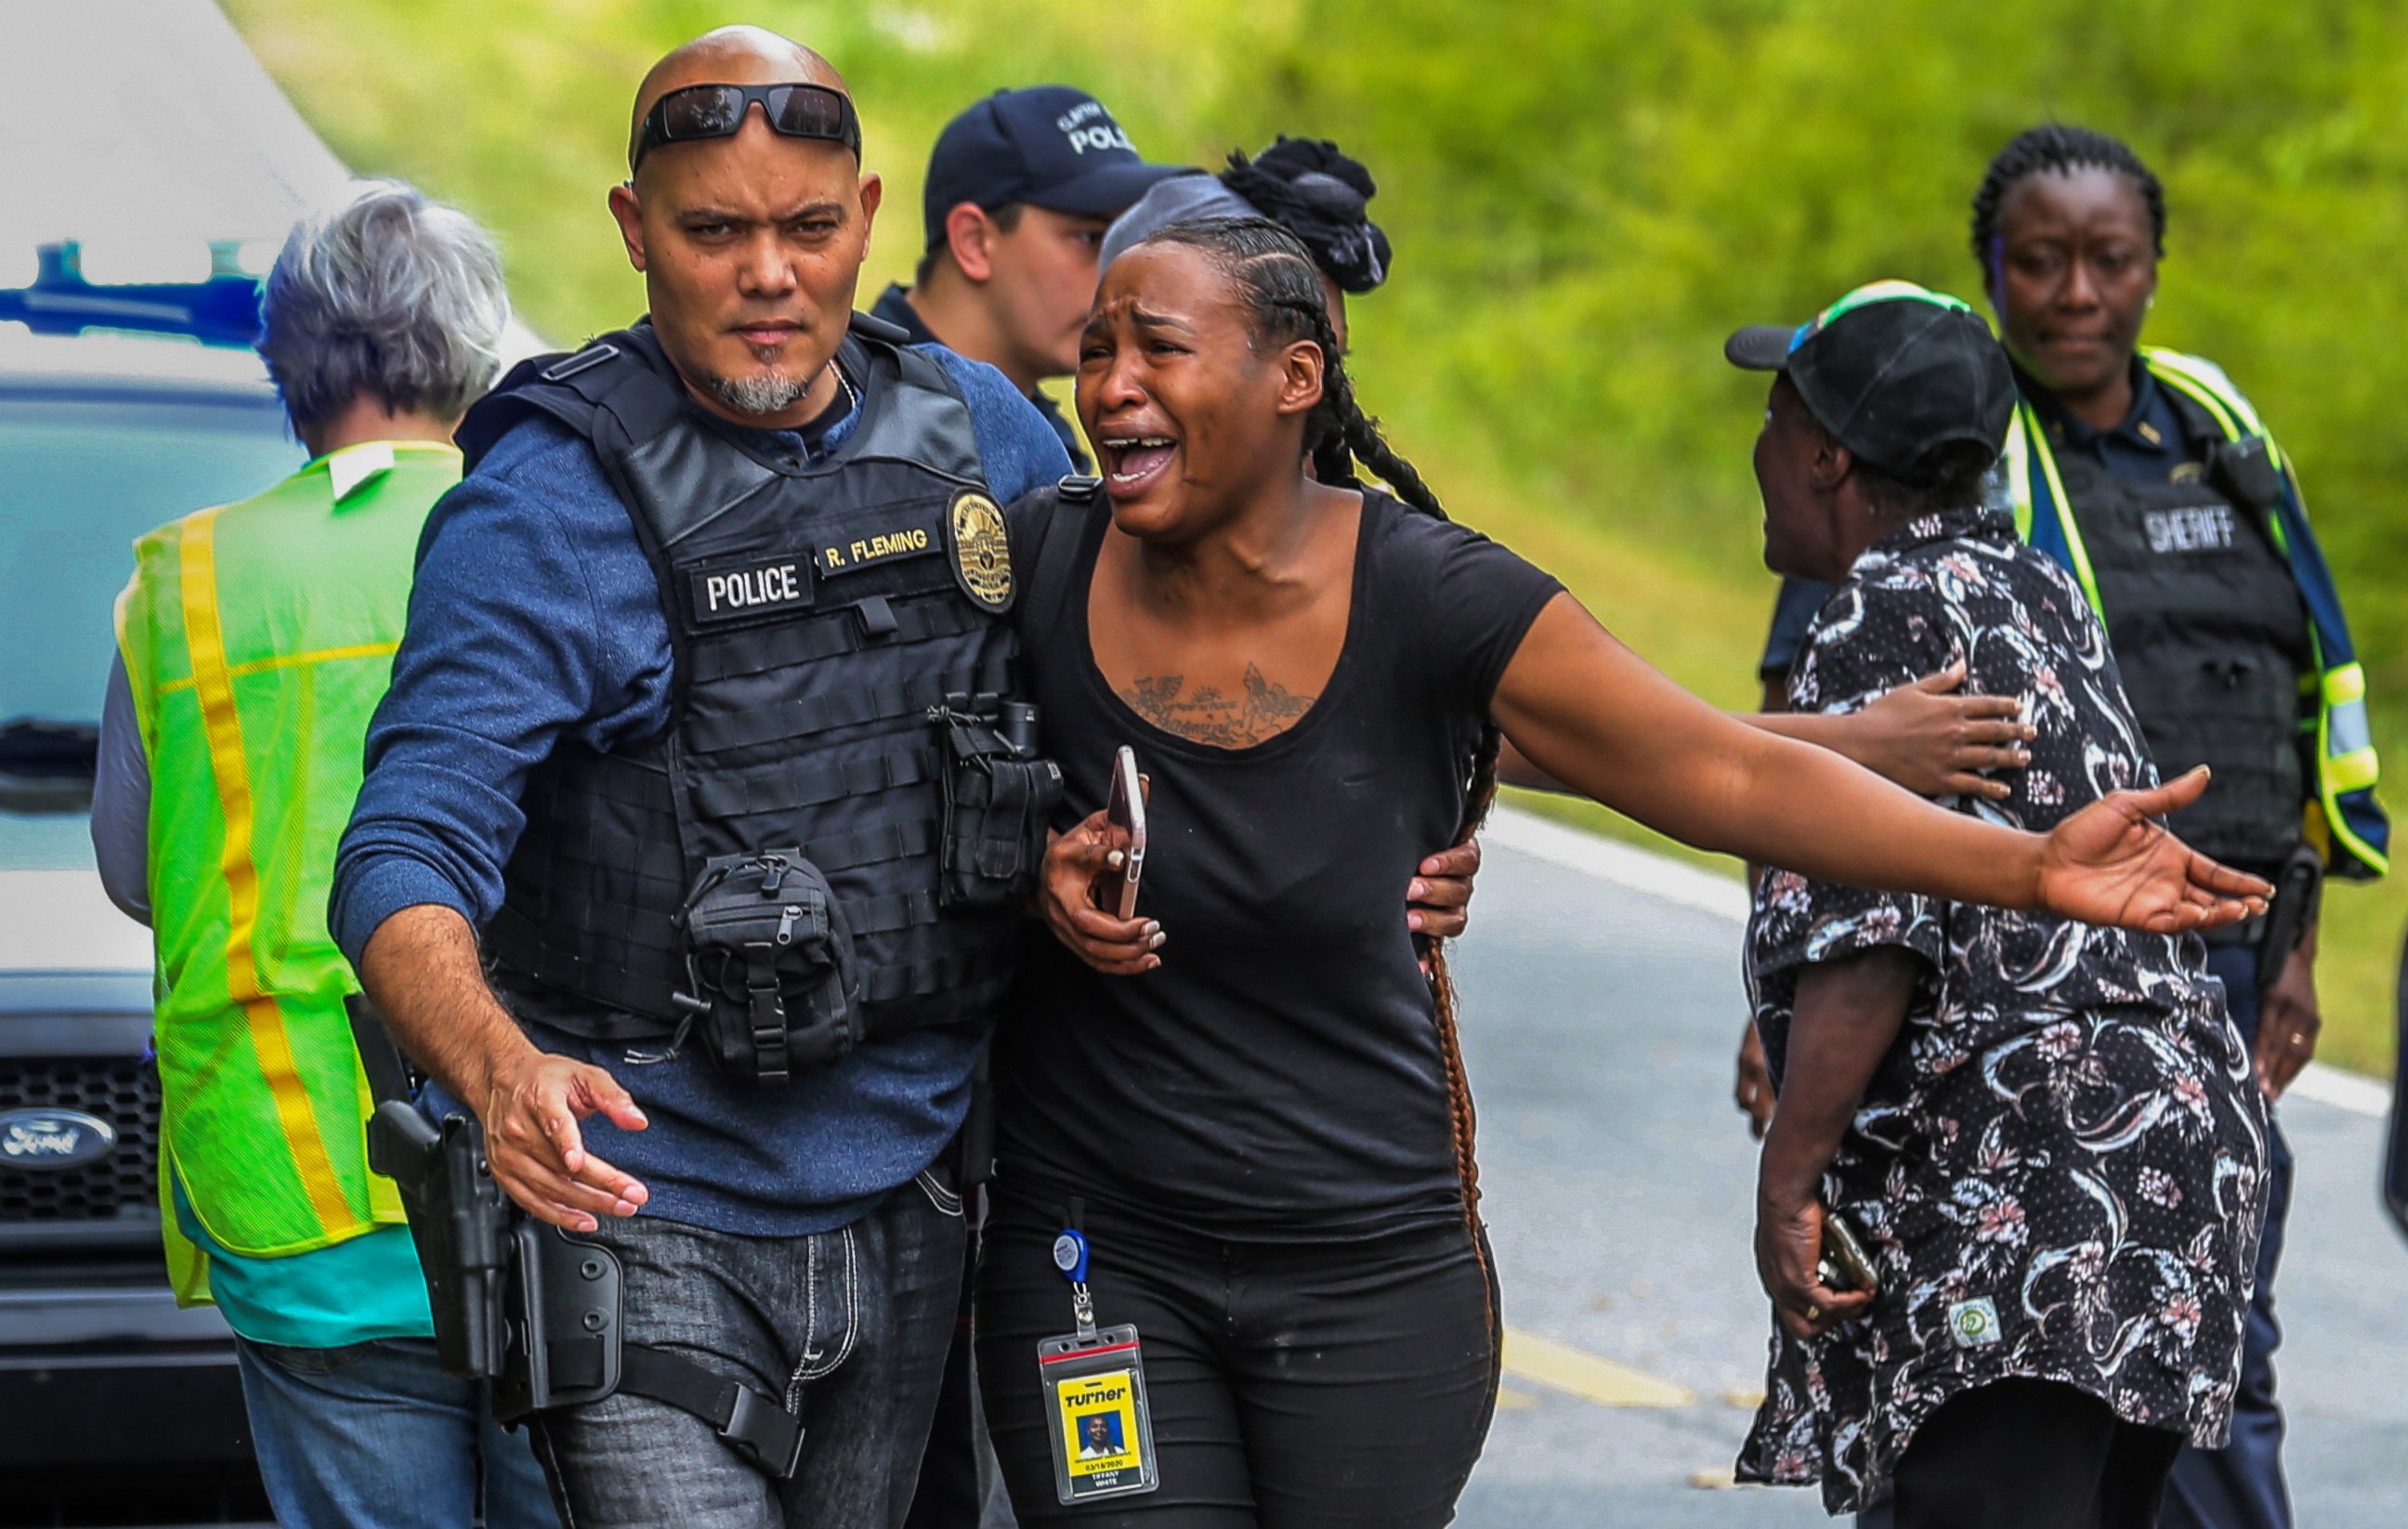 PHOTO: A woman believed to be related to ones involved in a hostage situation reacts as law enforcement on the scene tried to console them in Stockbridge, Ga., Thursday, April 4, 2019.